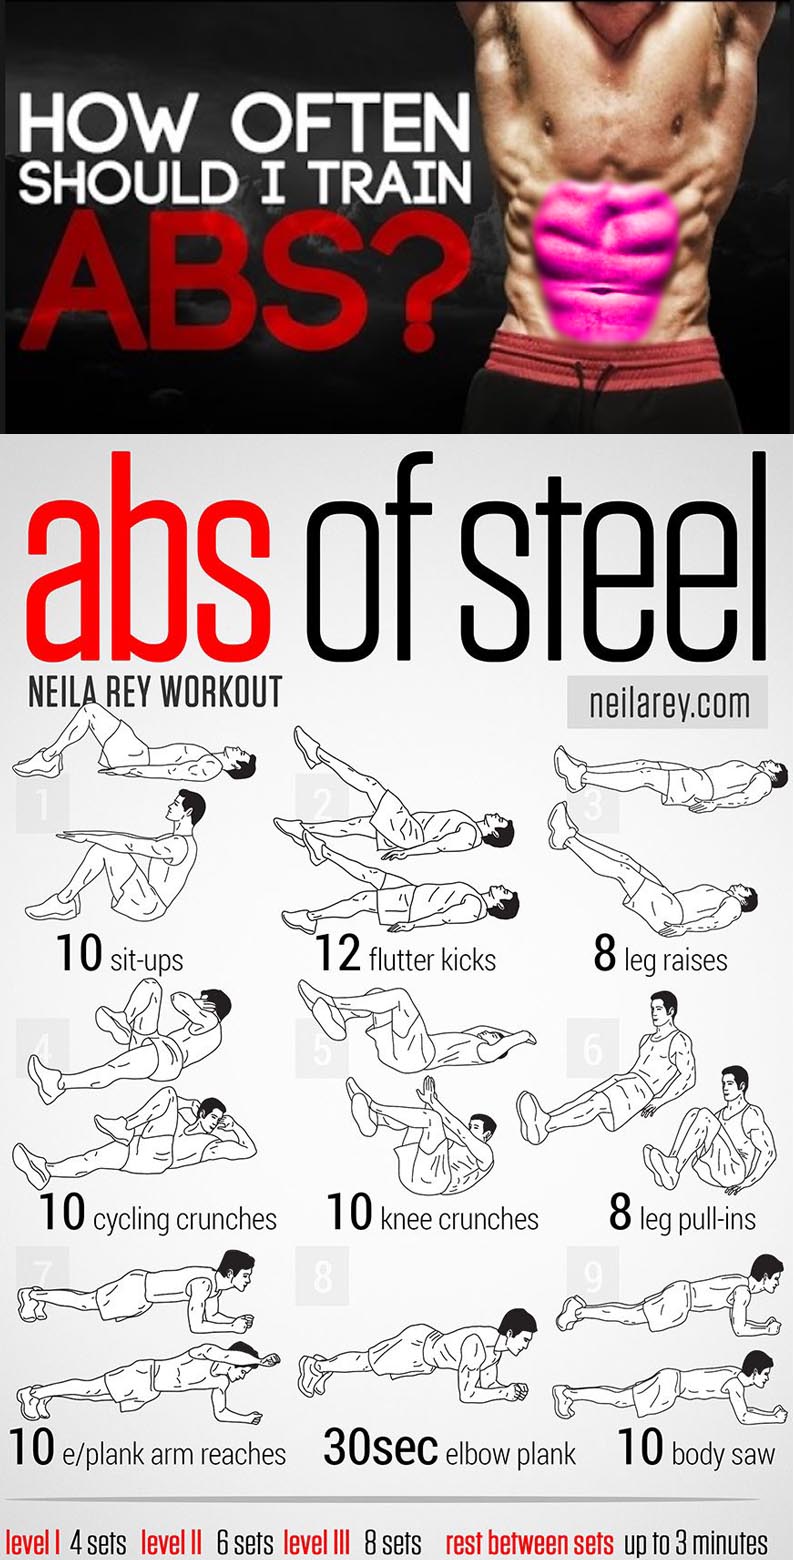 ABS OF STEEL